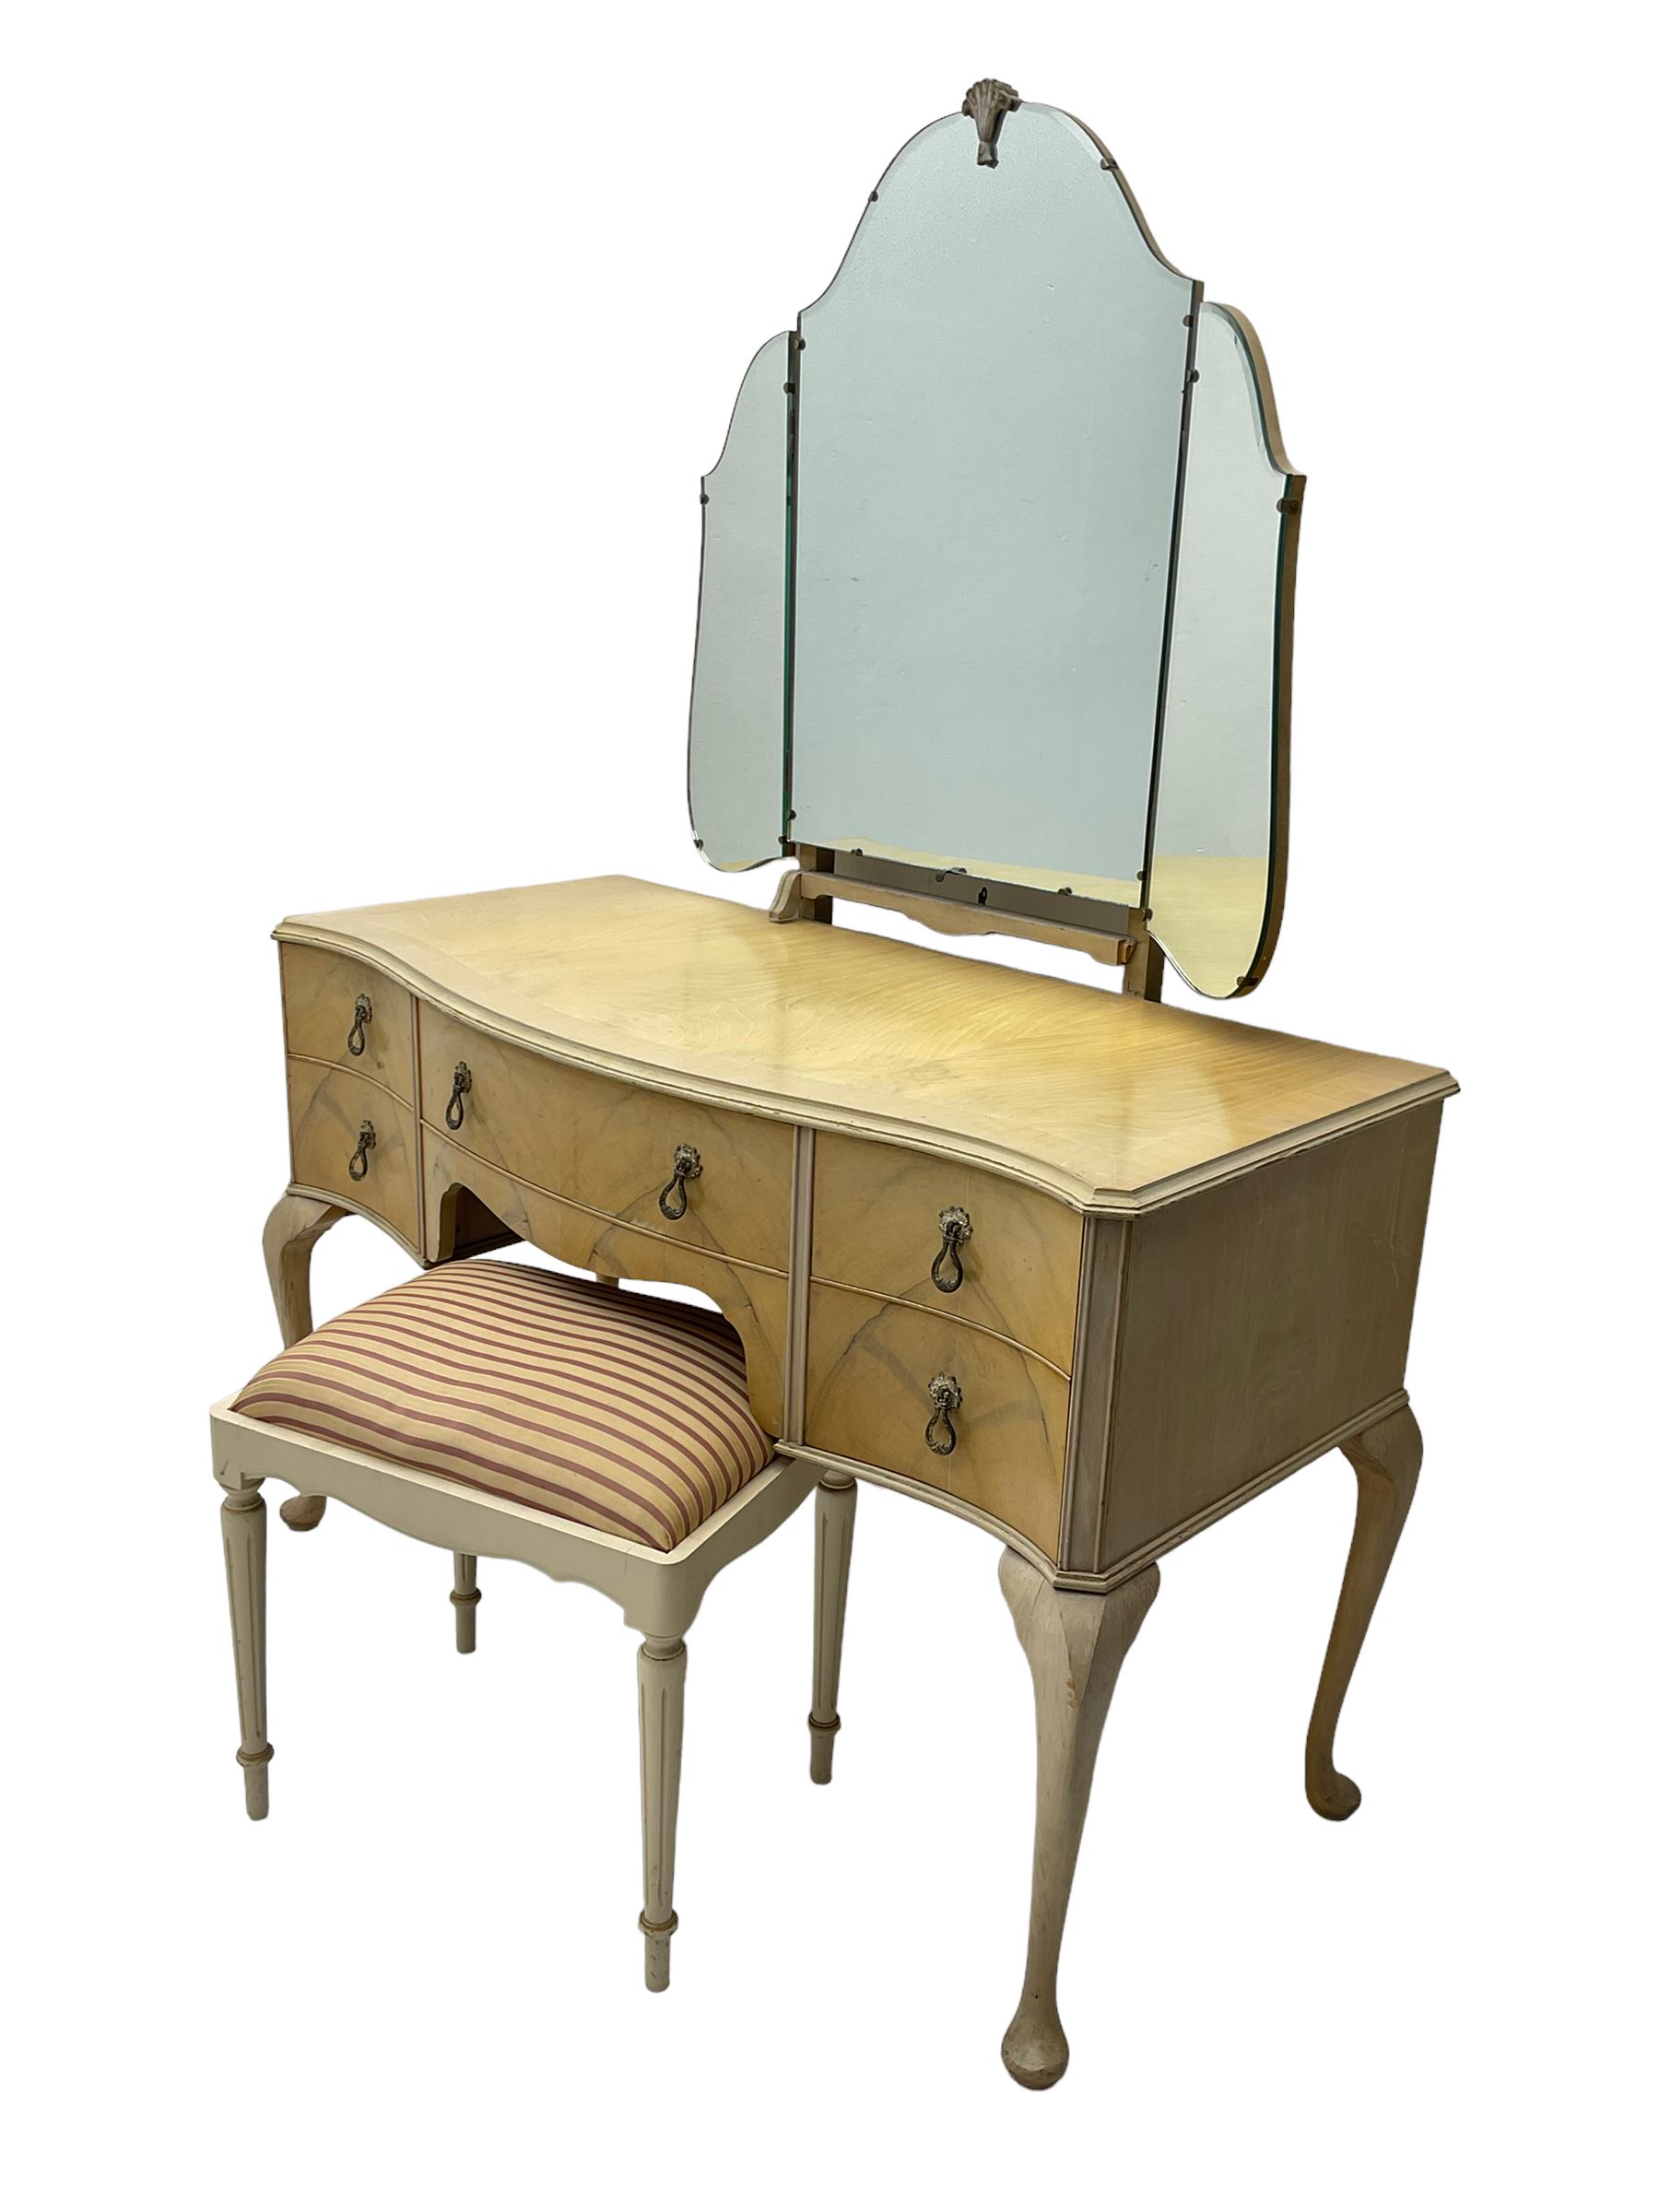 F Wrighton & Sons Ltd - French style painted serpentine dressing table - Image 11 of 11